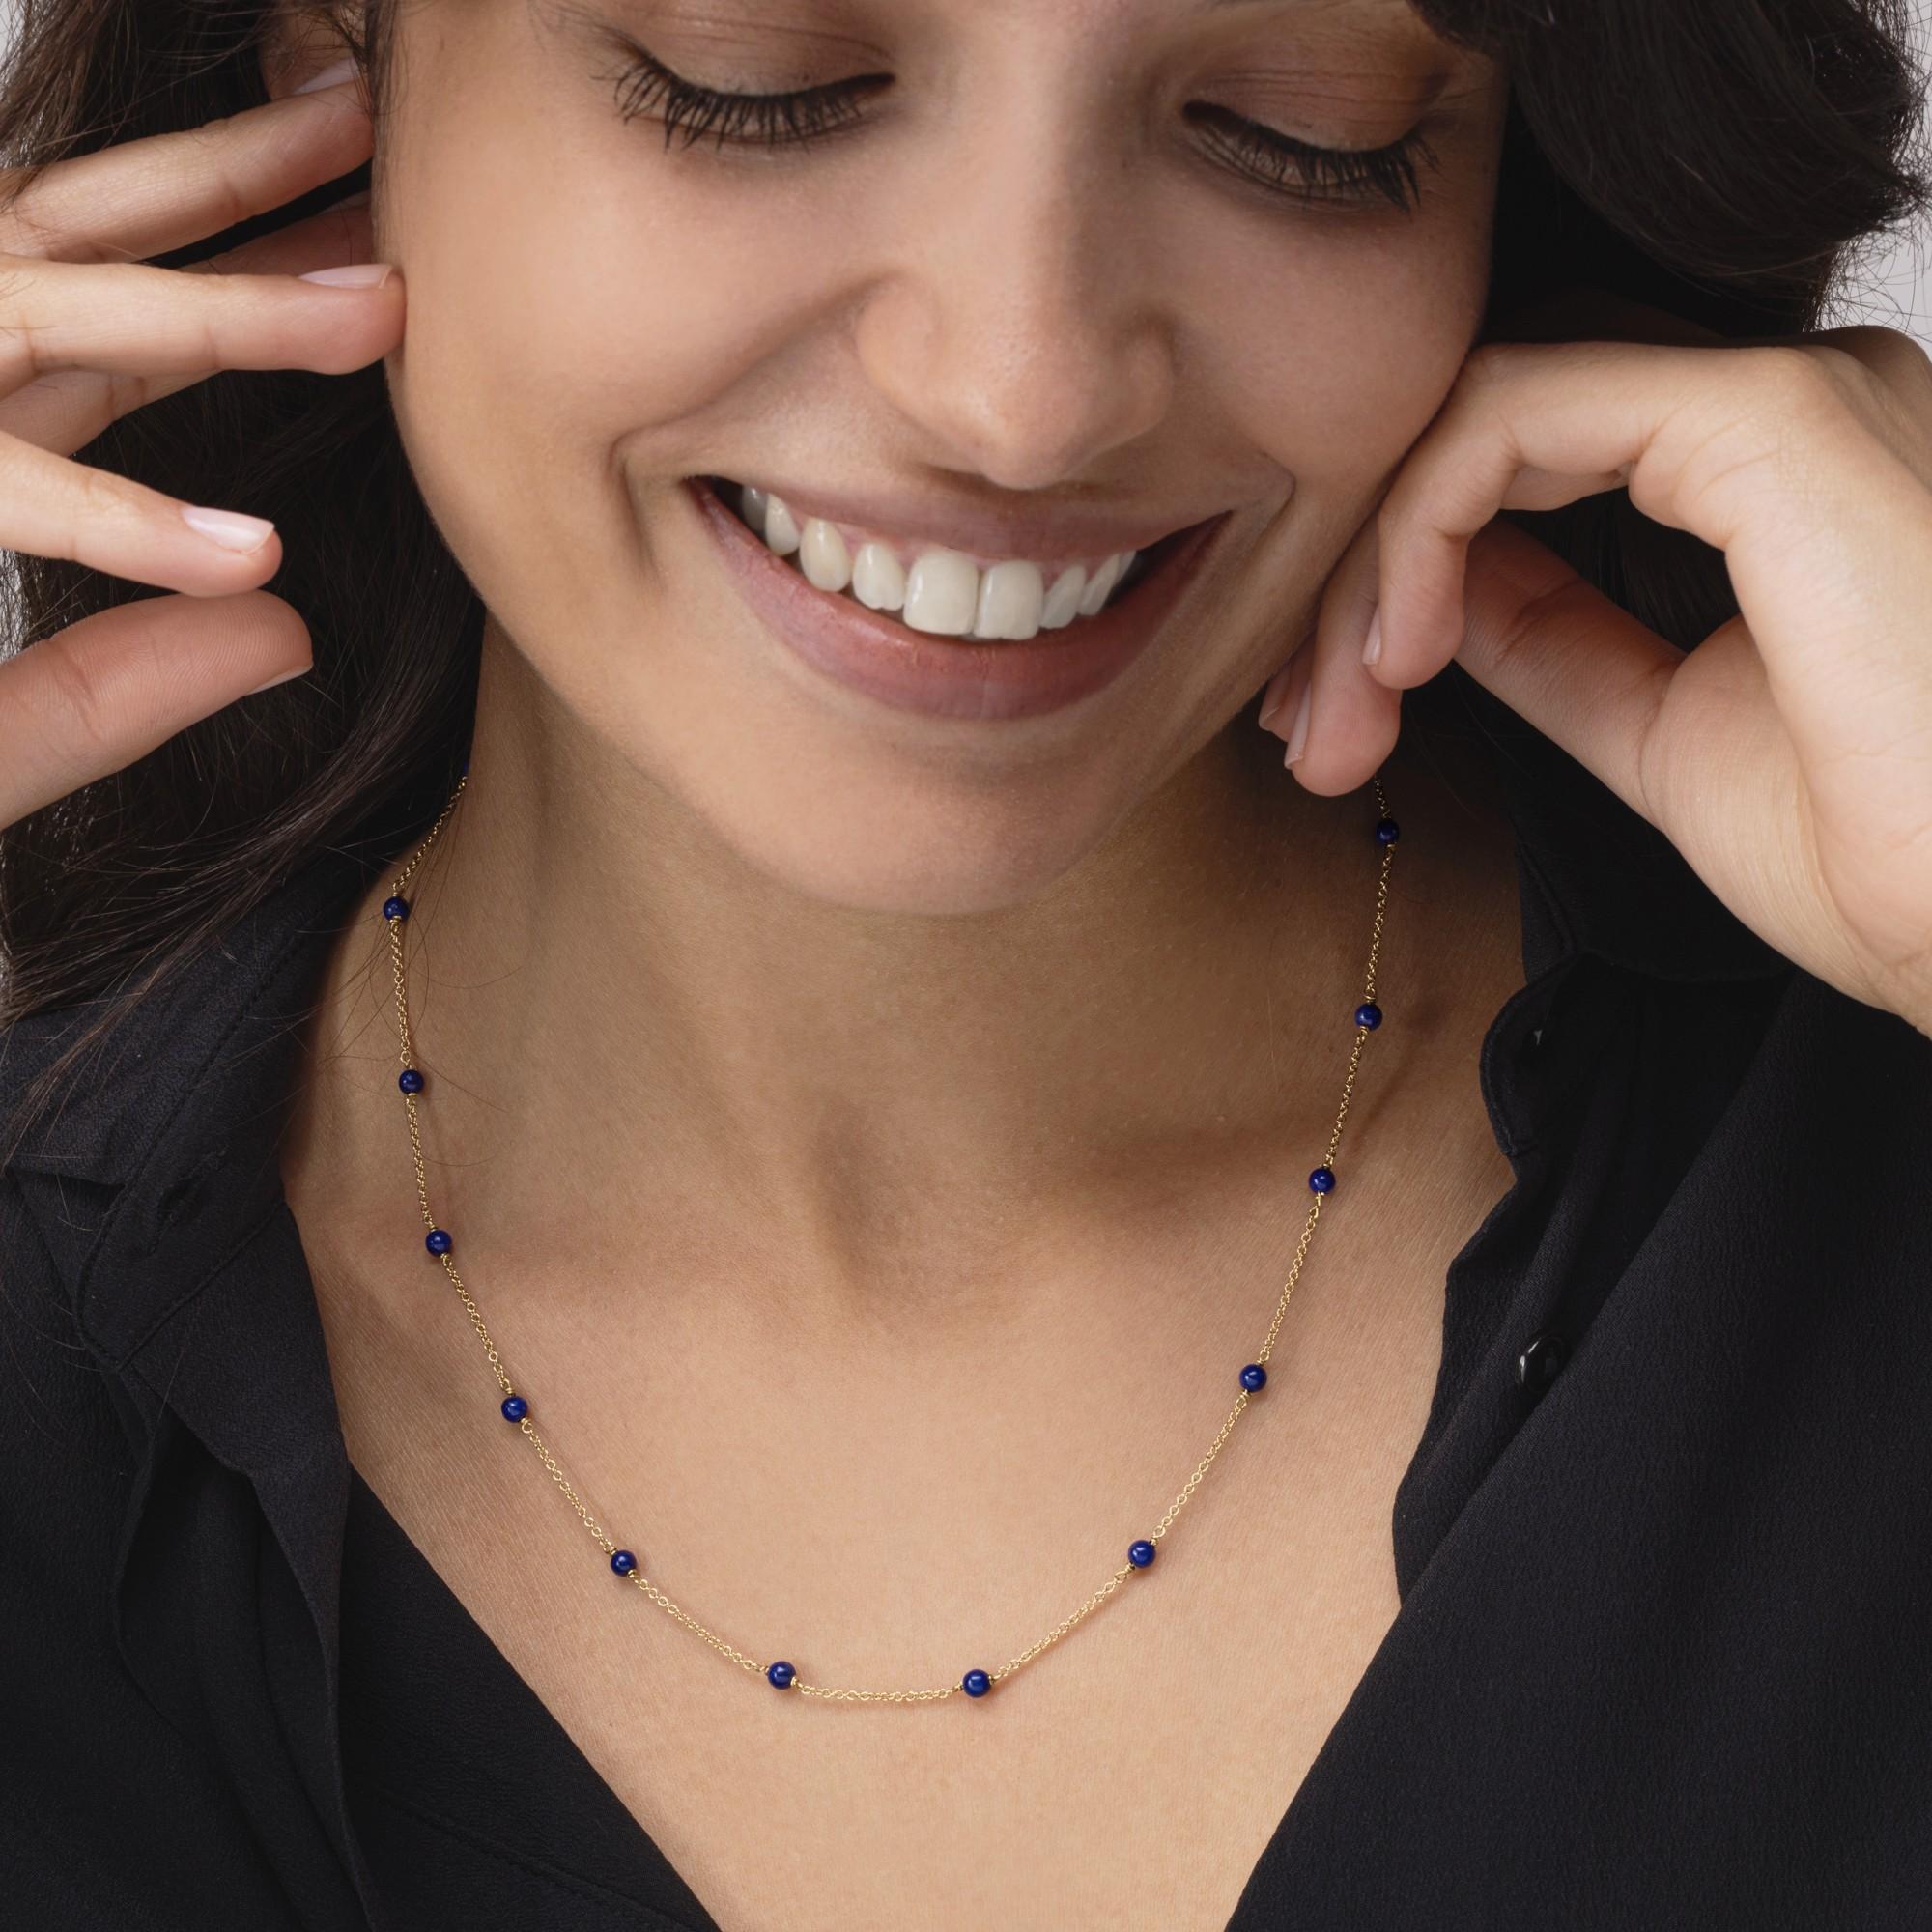 Alex Jona design collection, hand crafted in Italy, 18 karat yellow gold chain necklace alternating lapis lazuli beads.
Alex Jona jewels stand out, not only for their special design and for the excellent quality of the gemstones, but also for the